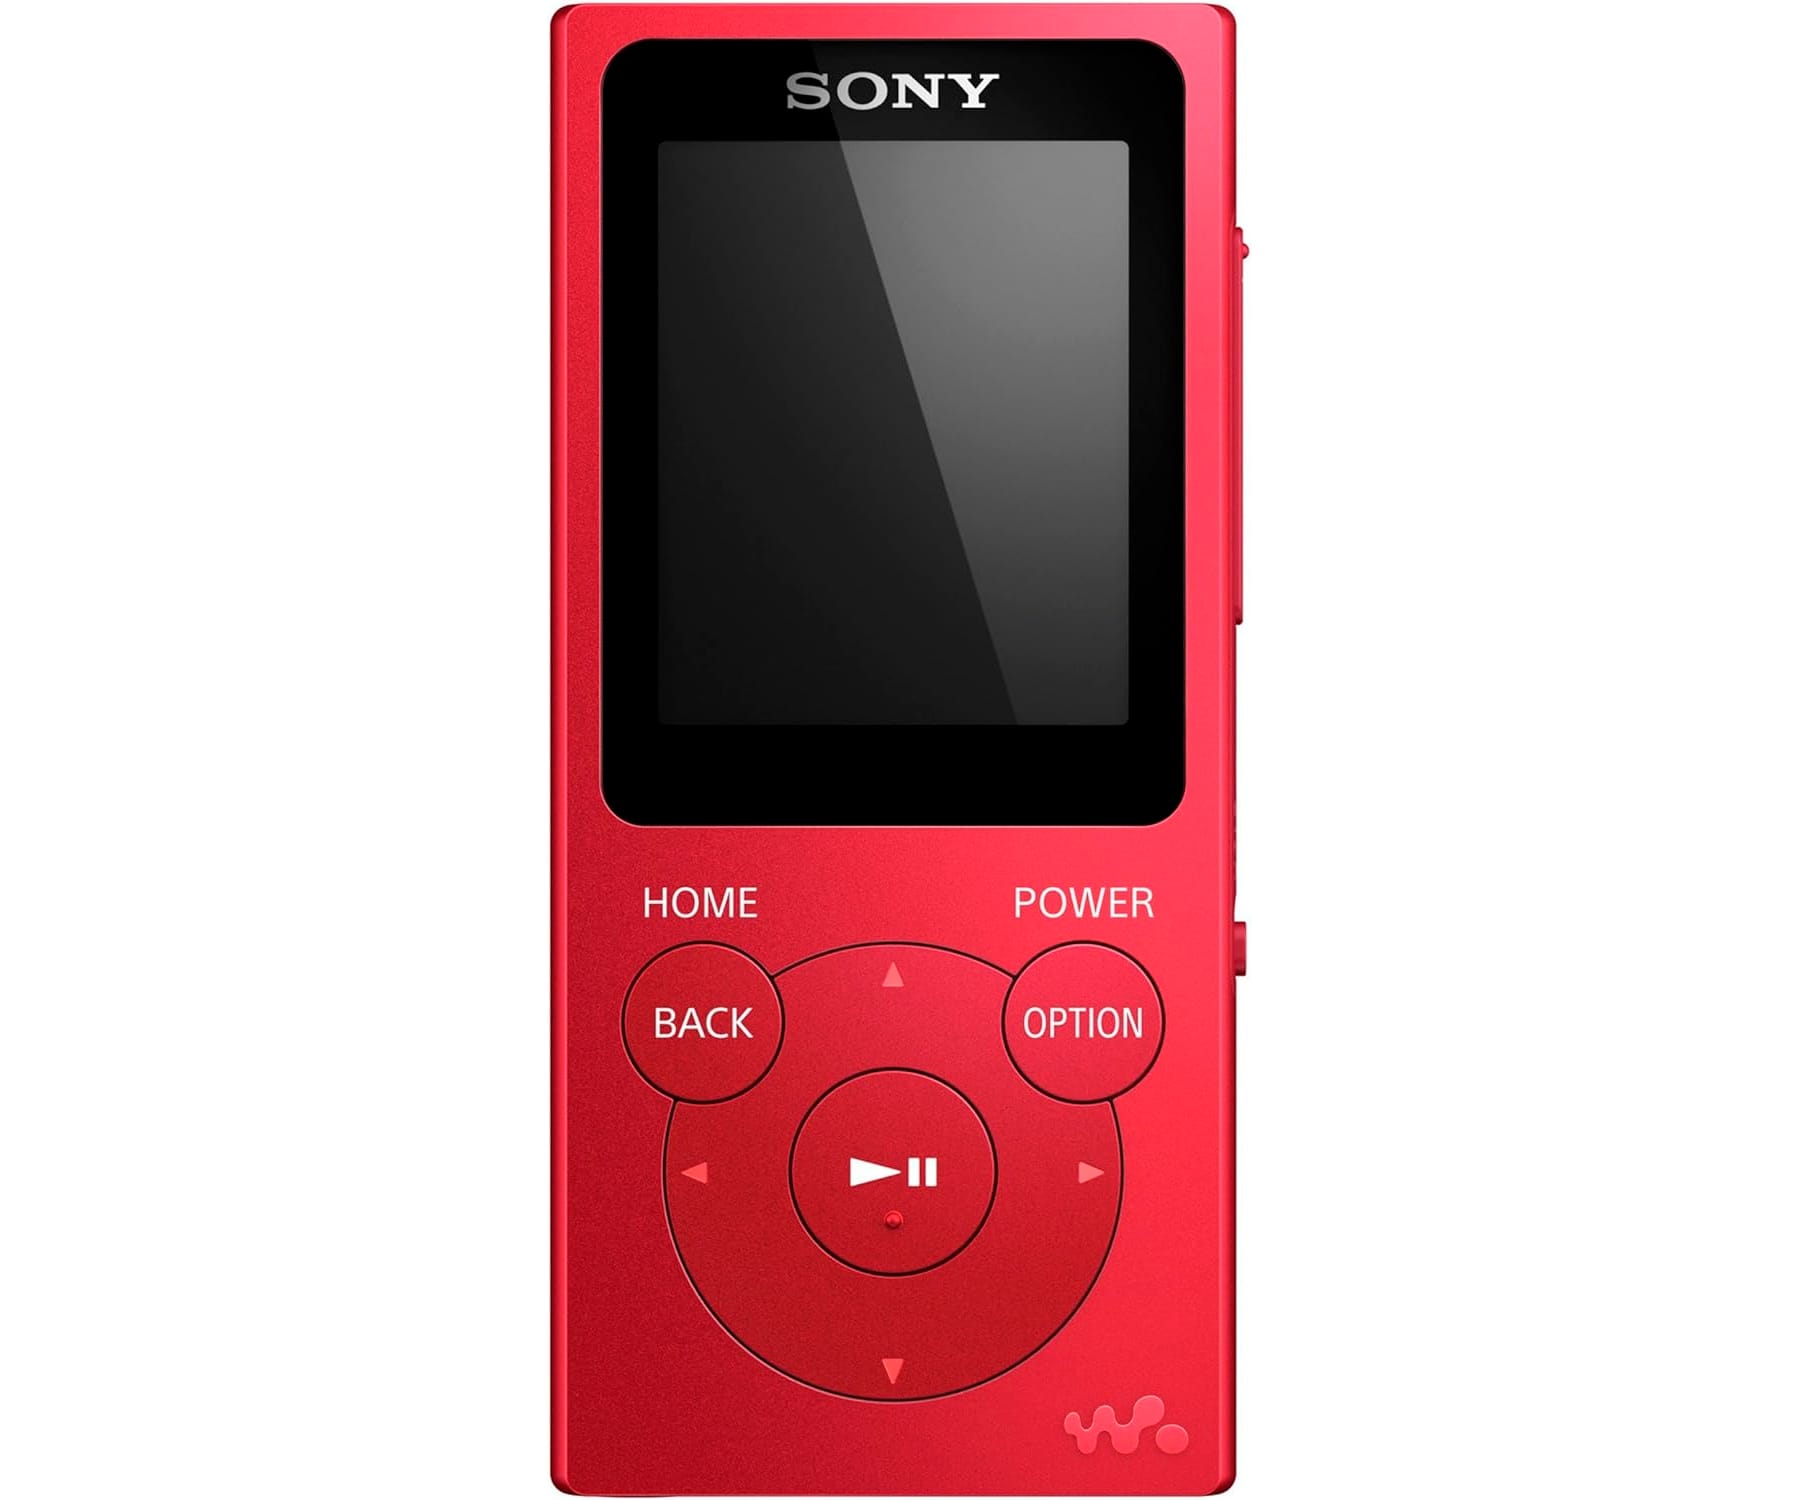 SONY NW-E394 RED / REPRODUCTOR MP3 8GB